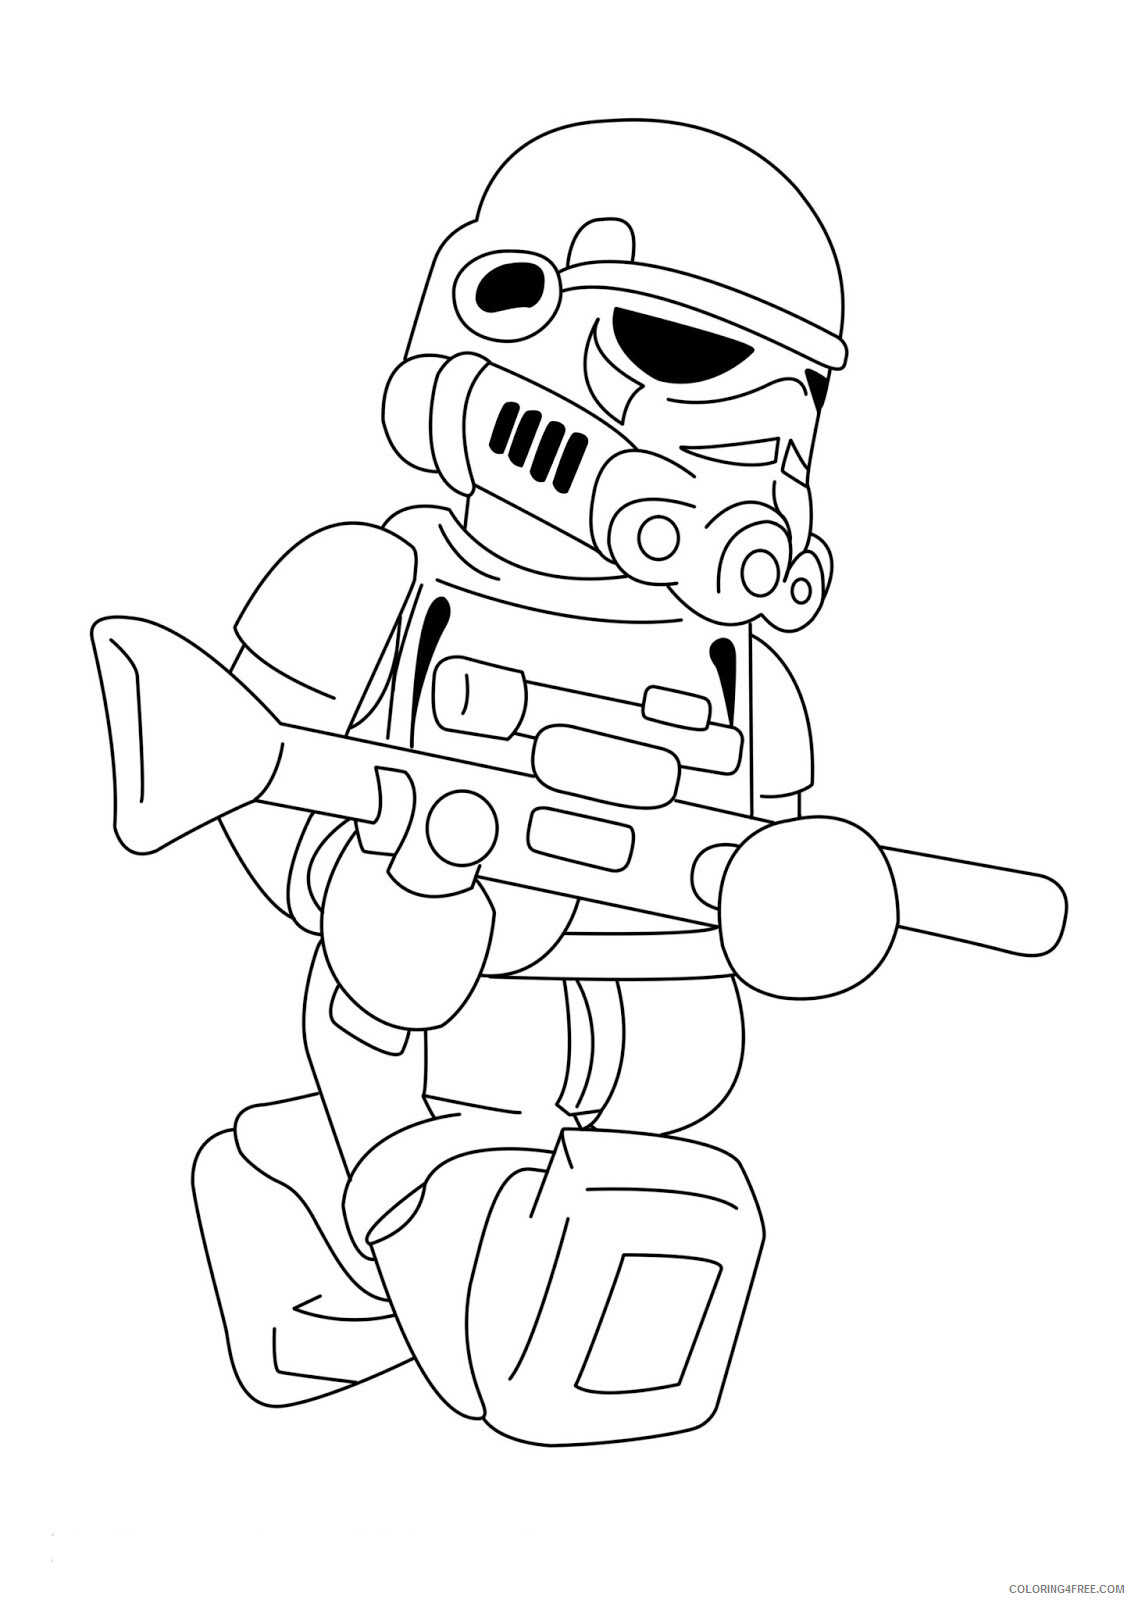 Star Wars Coloring Pages TV Film Lego Star Wars Printable 2020 07800 Coloring4free